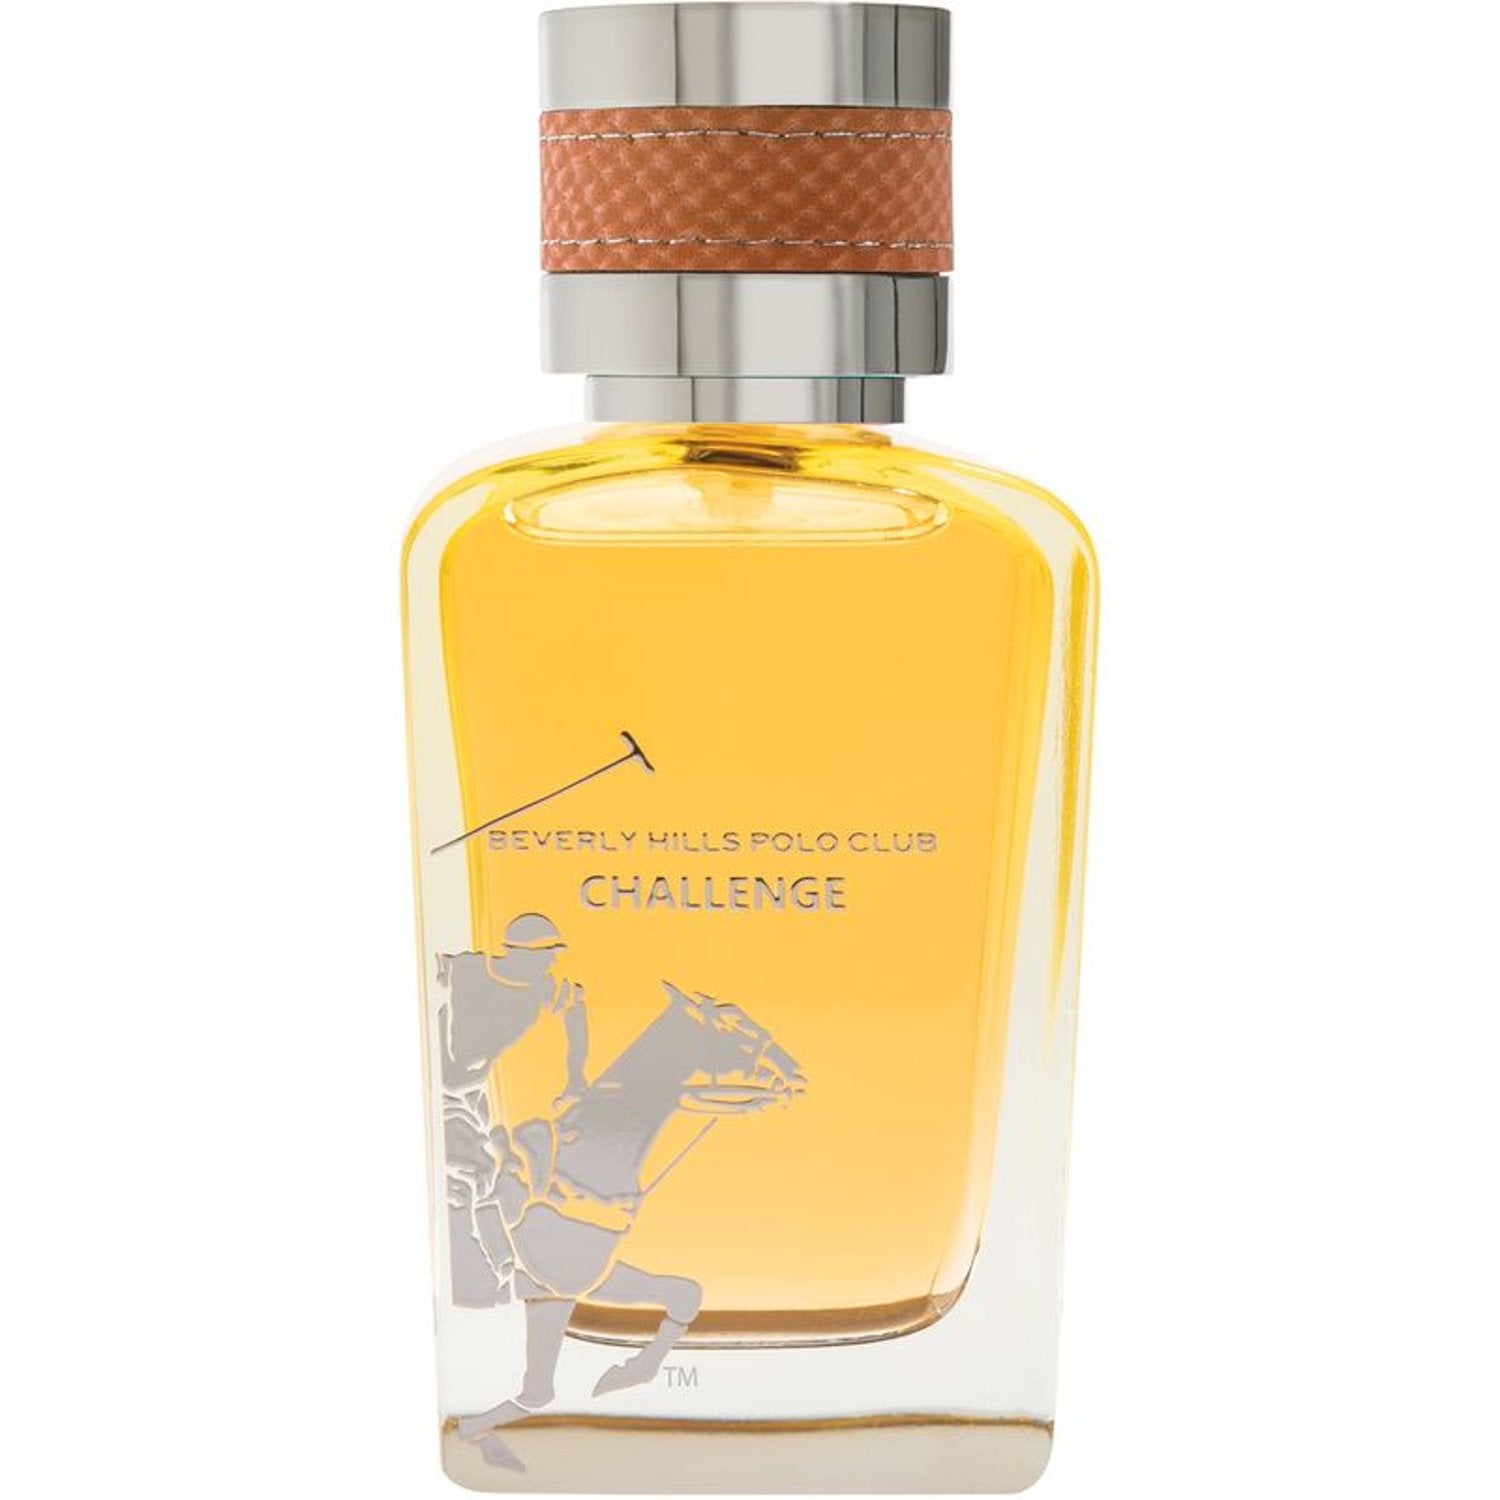 Beverly Hills Polo Club Challenge Perfume Online in Bahrain - Halabh